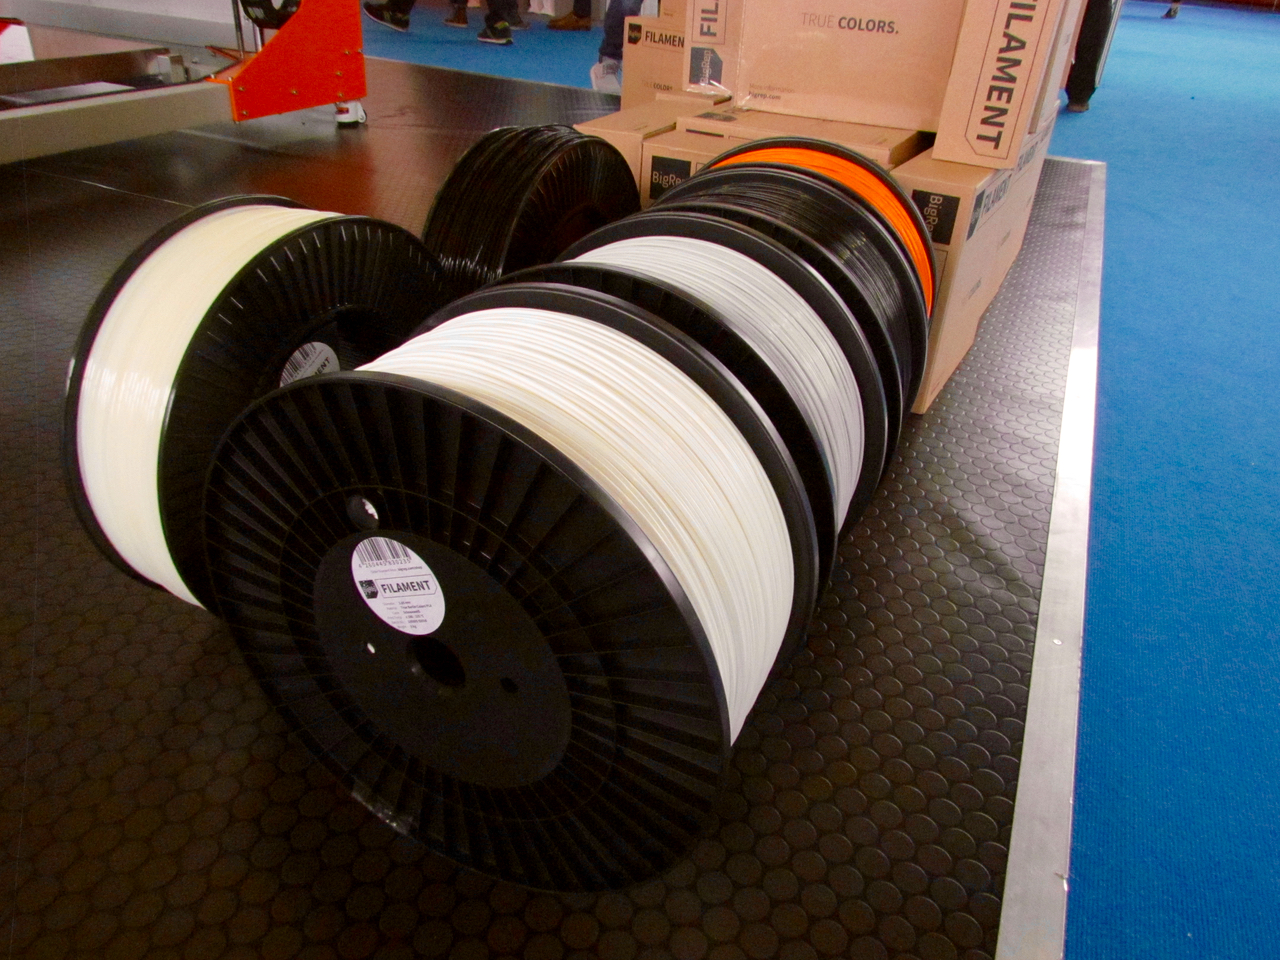  Are these 8Kg spools of 3D printer filament? 